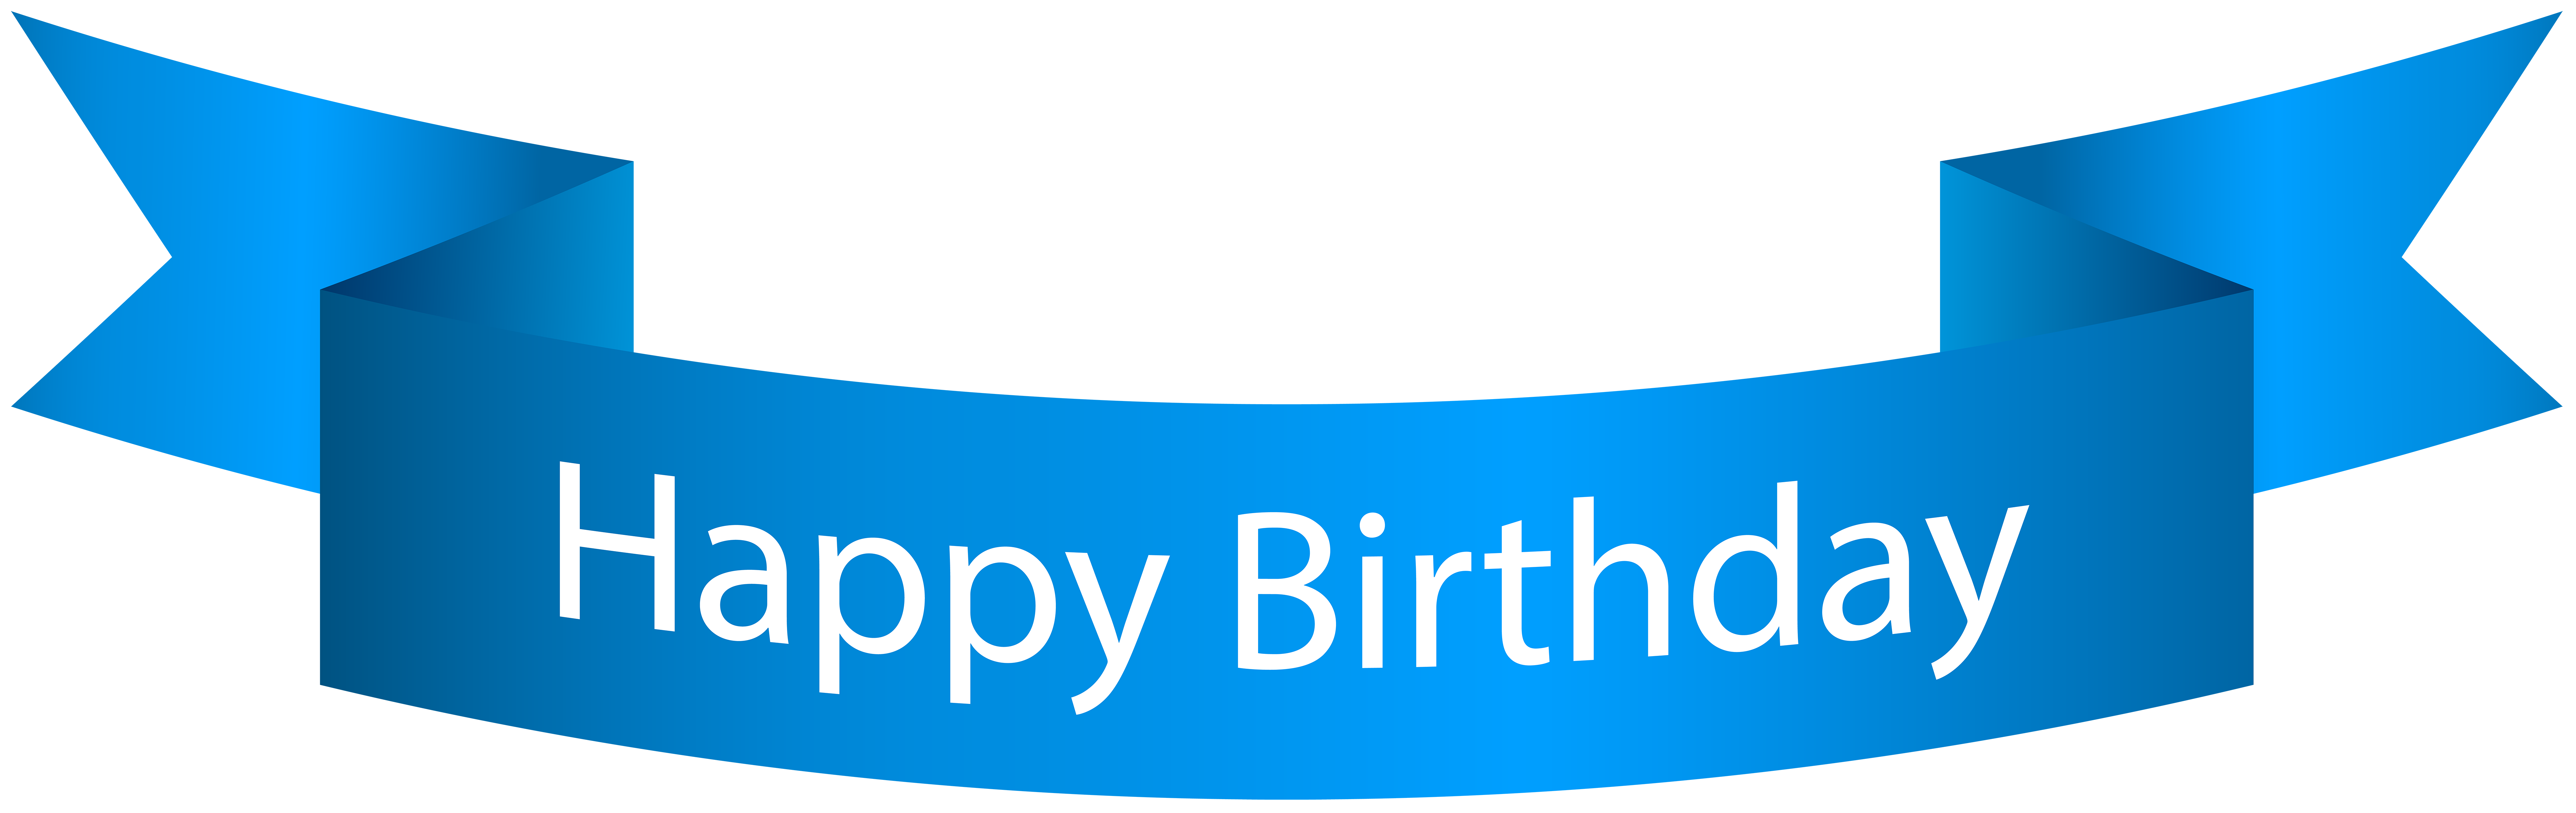 Happy Birthday Blue Banner Png Clip Art Image Gallery Yopriceville High Quality Images And Transparent Png Free Clipart